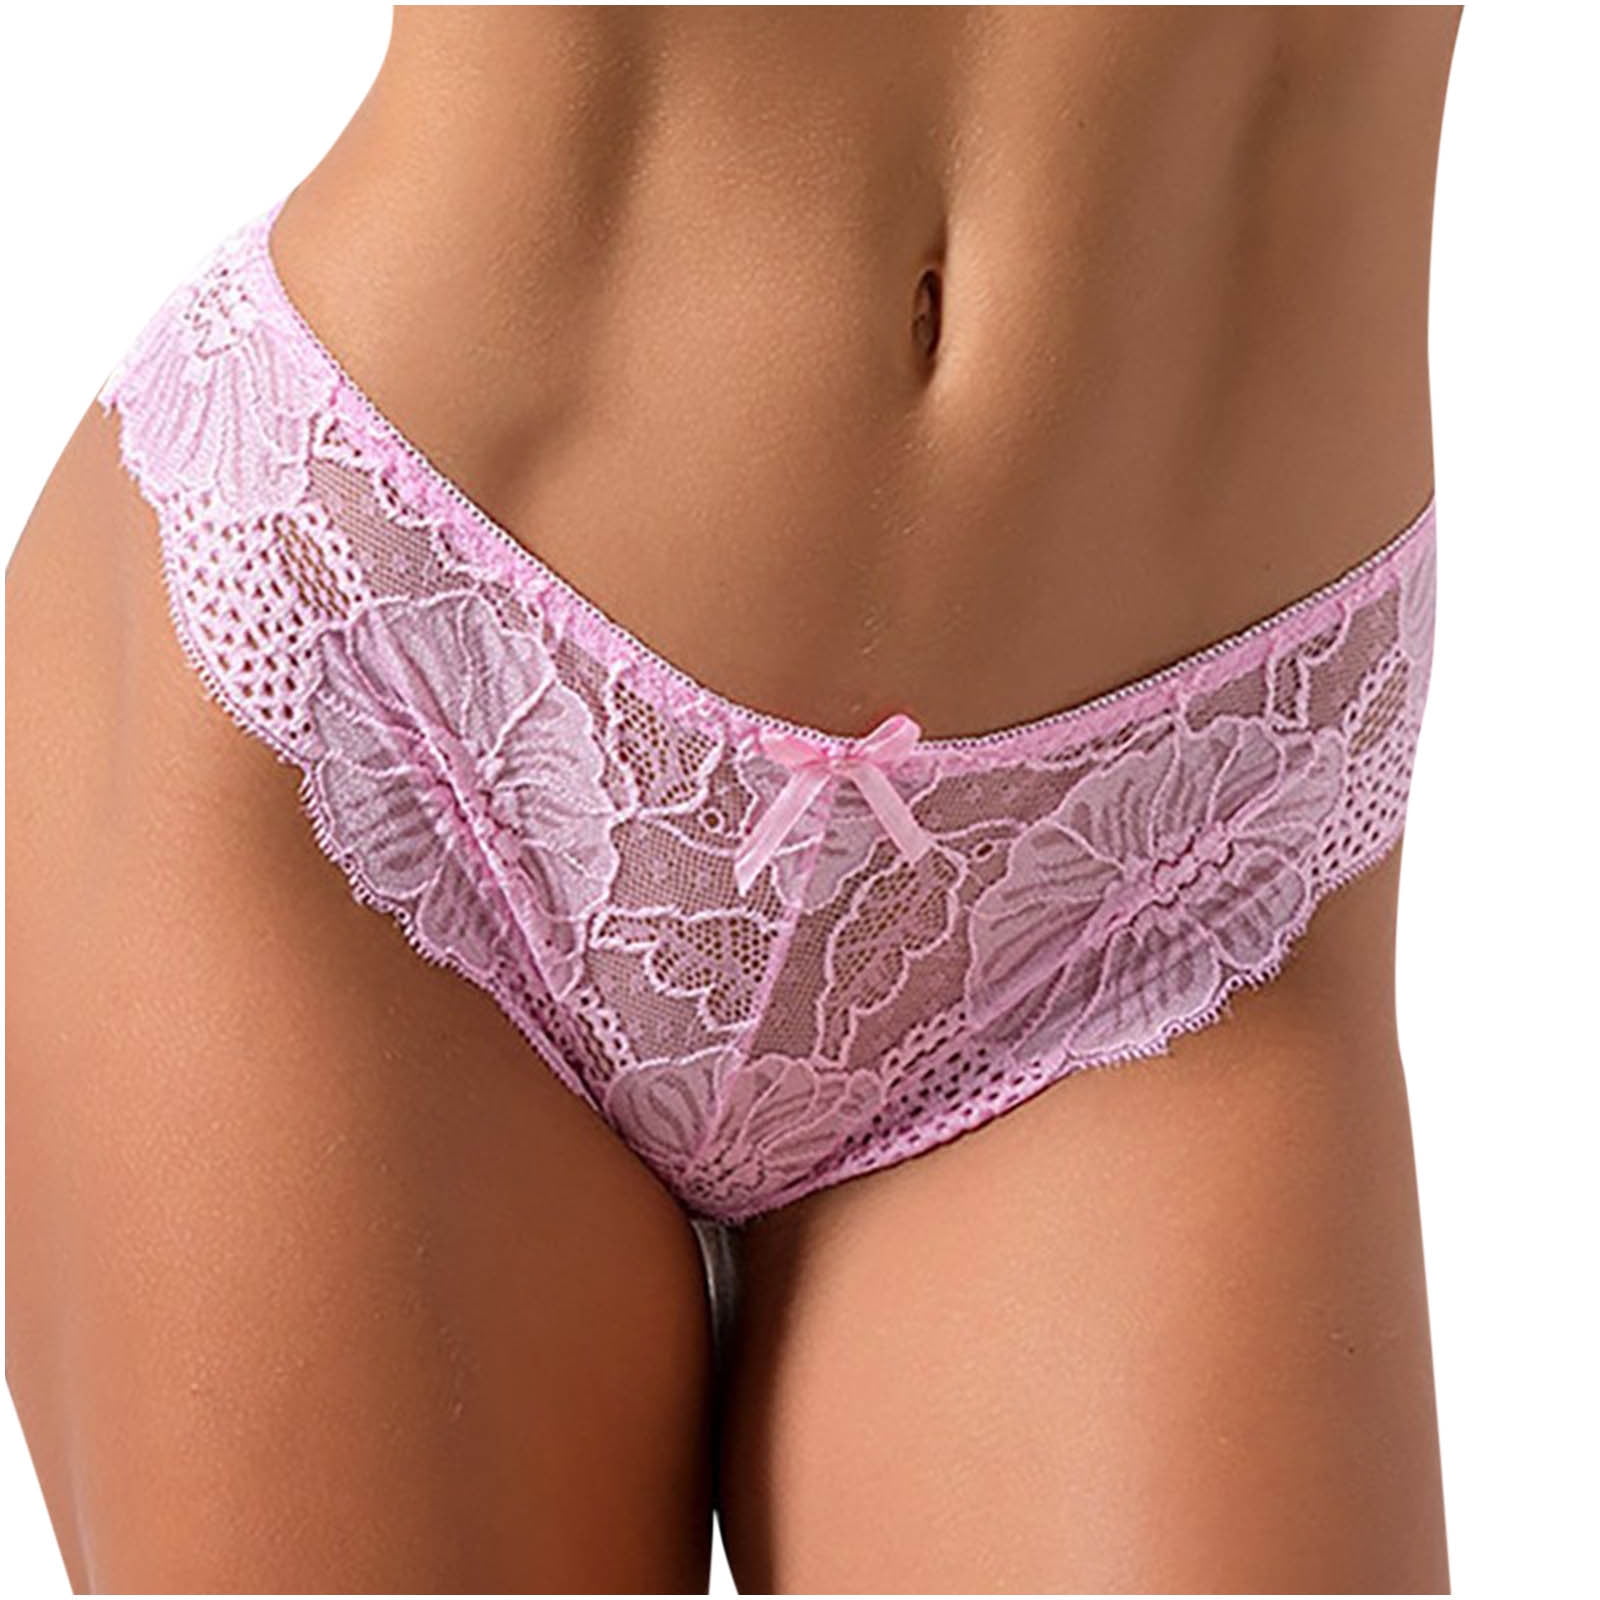 Floral Lace Open Crotch Lace Hipster Panties With Bowknot Erotic